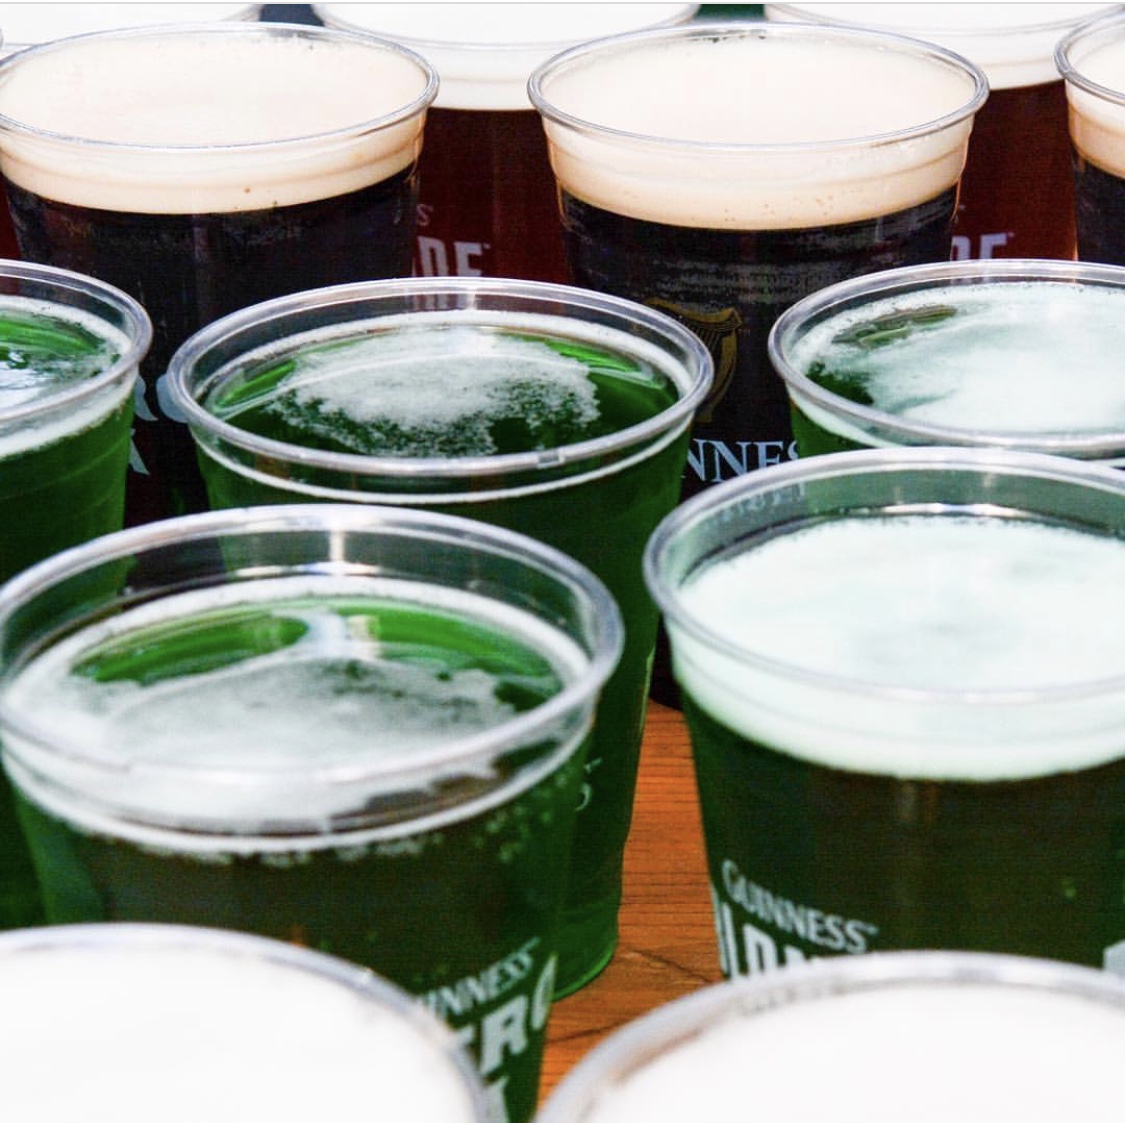 drinks on plastic cups for ST. PATRICK'S DAY